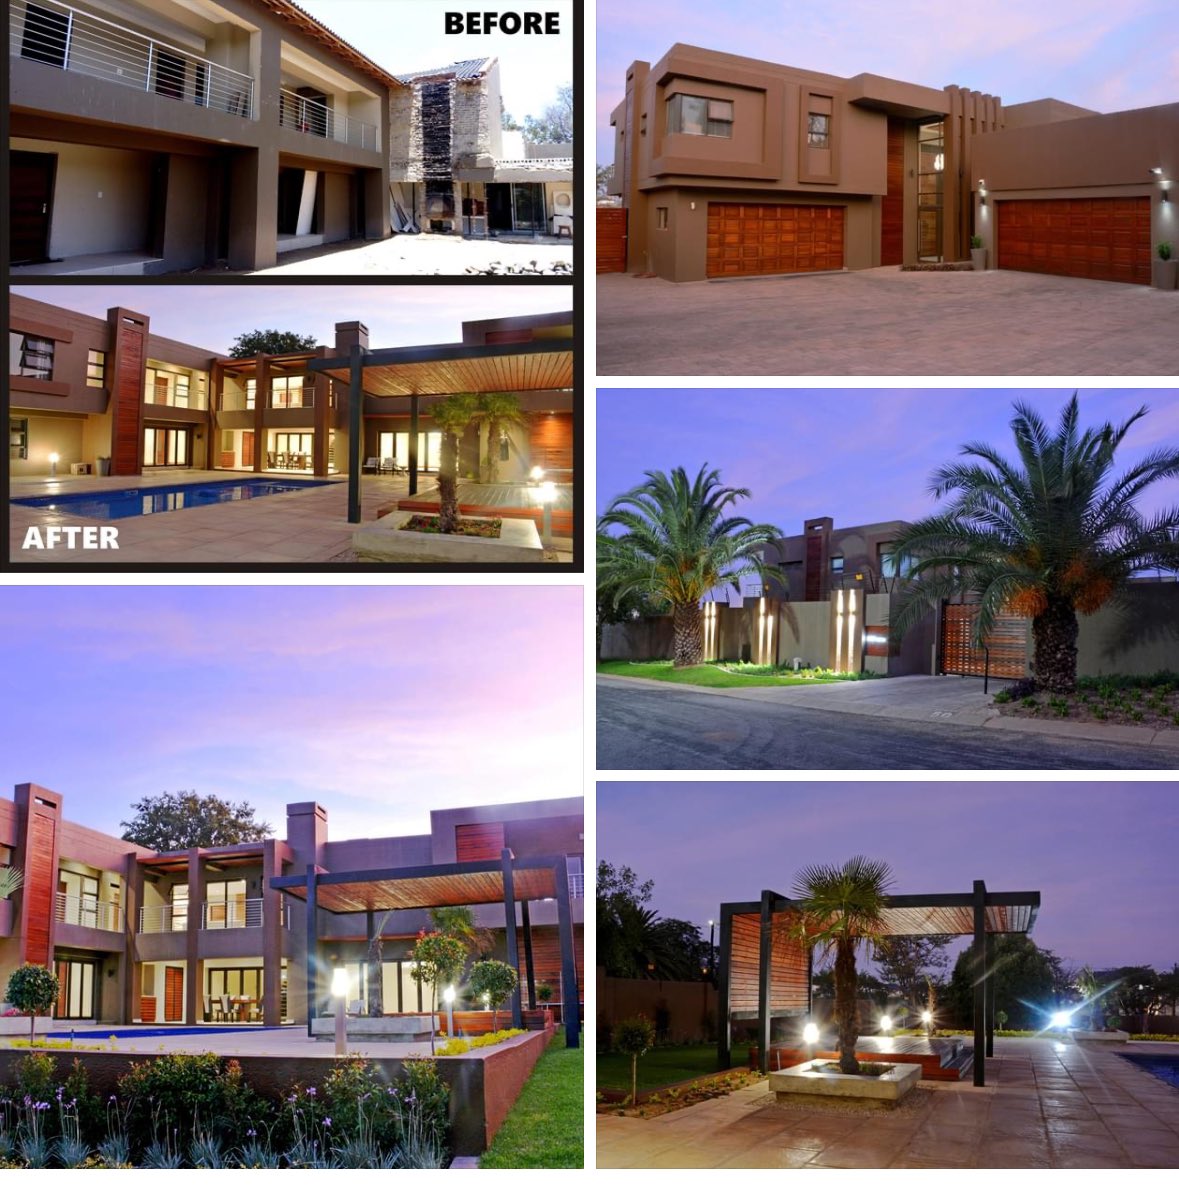 My cousin, Sizwe Simelane is a very talented architect. So proud of him. His work? Chef’s kiss. He company does architectural designs, home extensions and renovations, landscaping and interior design. You can contact him at sizwesimelane3@gmail.com for your needs. 🏡🔨🏠🏚️🪴🛖🔧